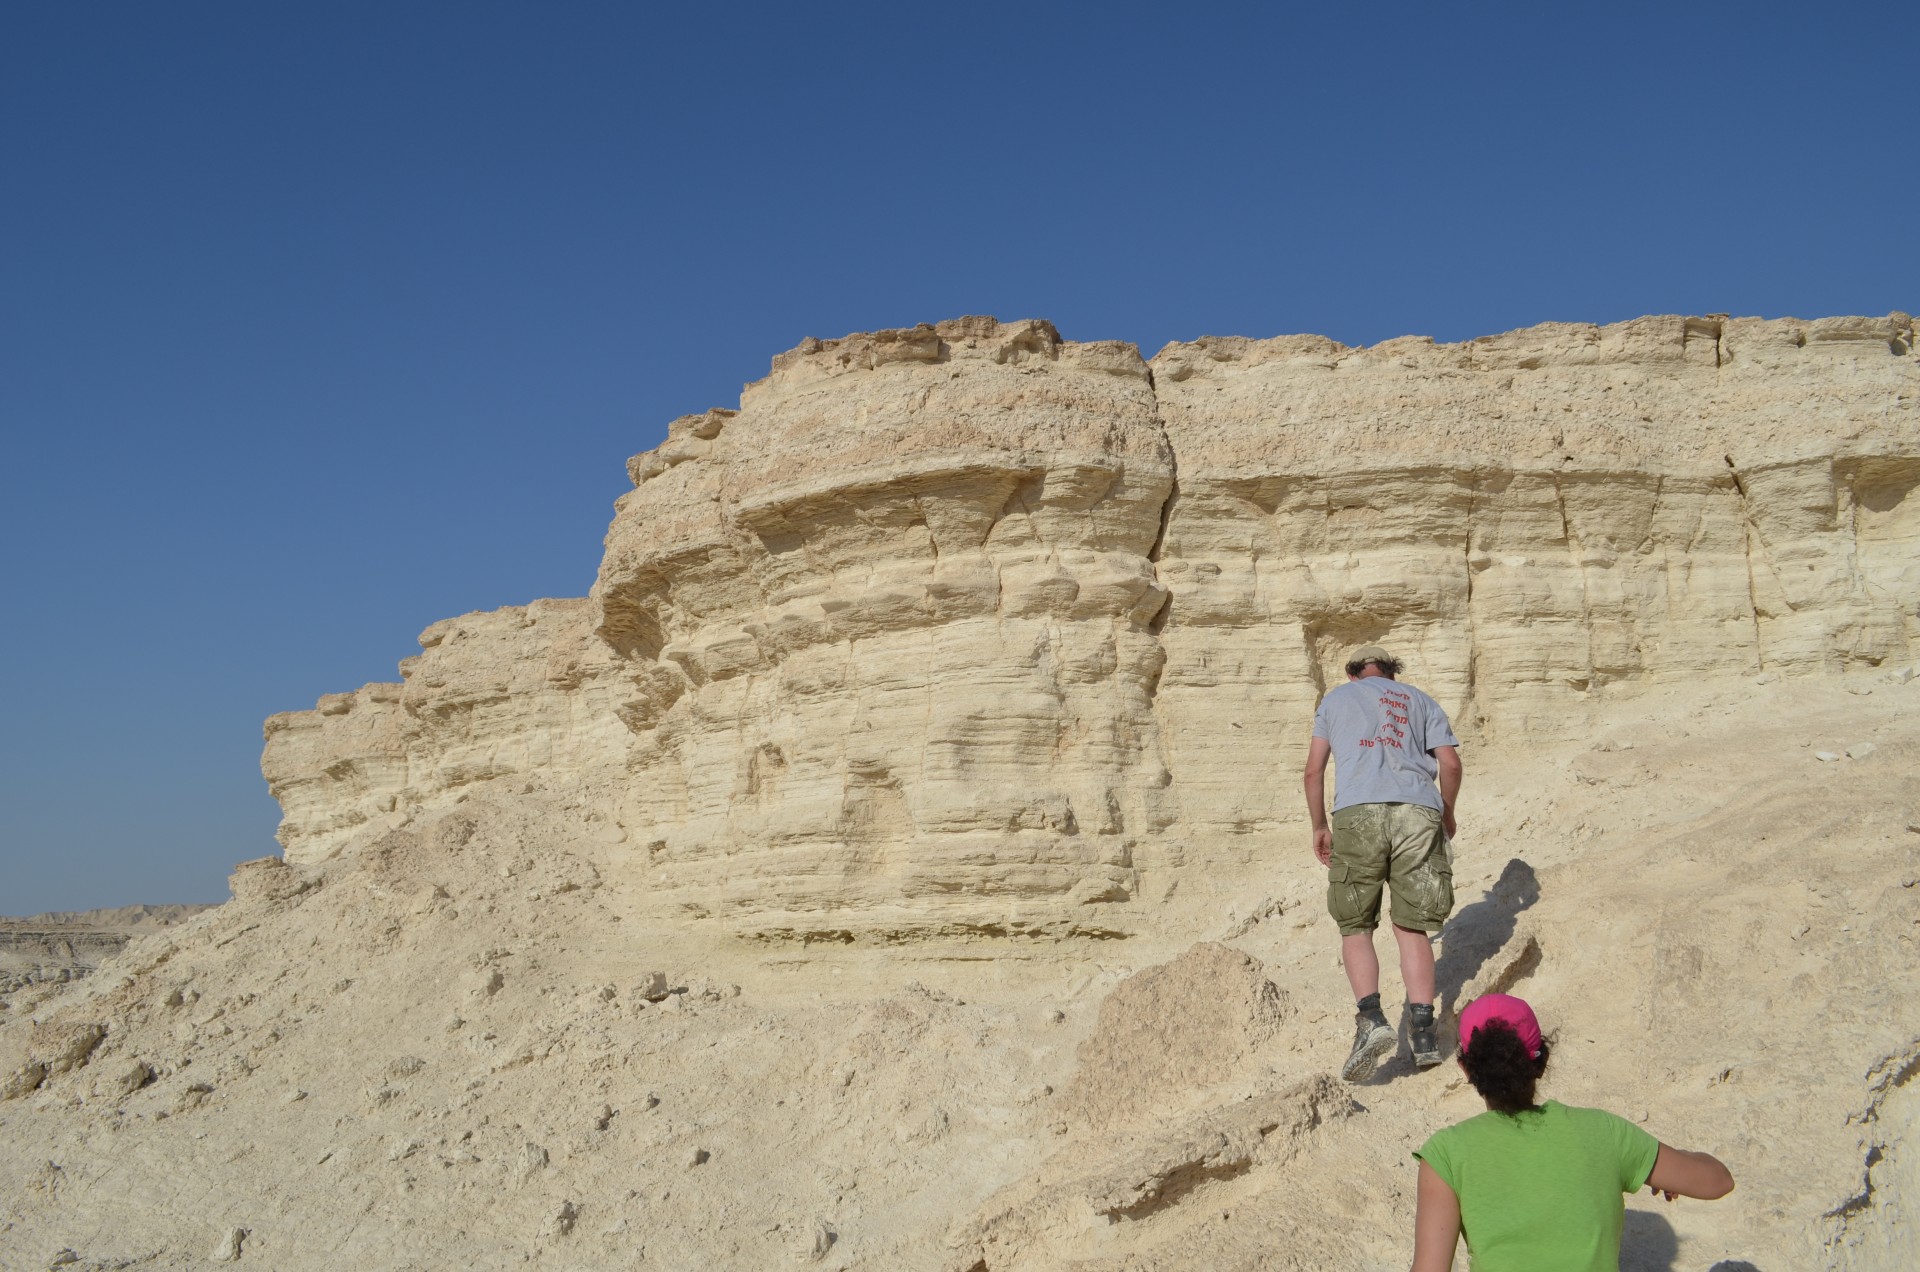 Kiro and Mordechai Stein of the Geological Survey of Israel approach a Cliffside deposit in the Israeli desert.